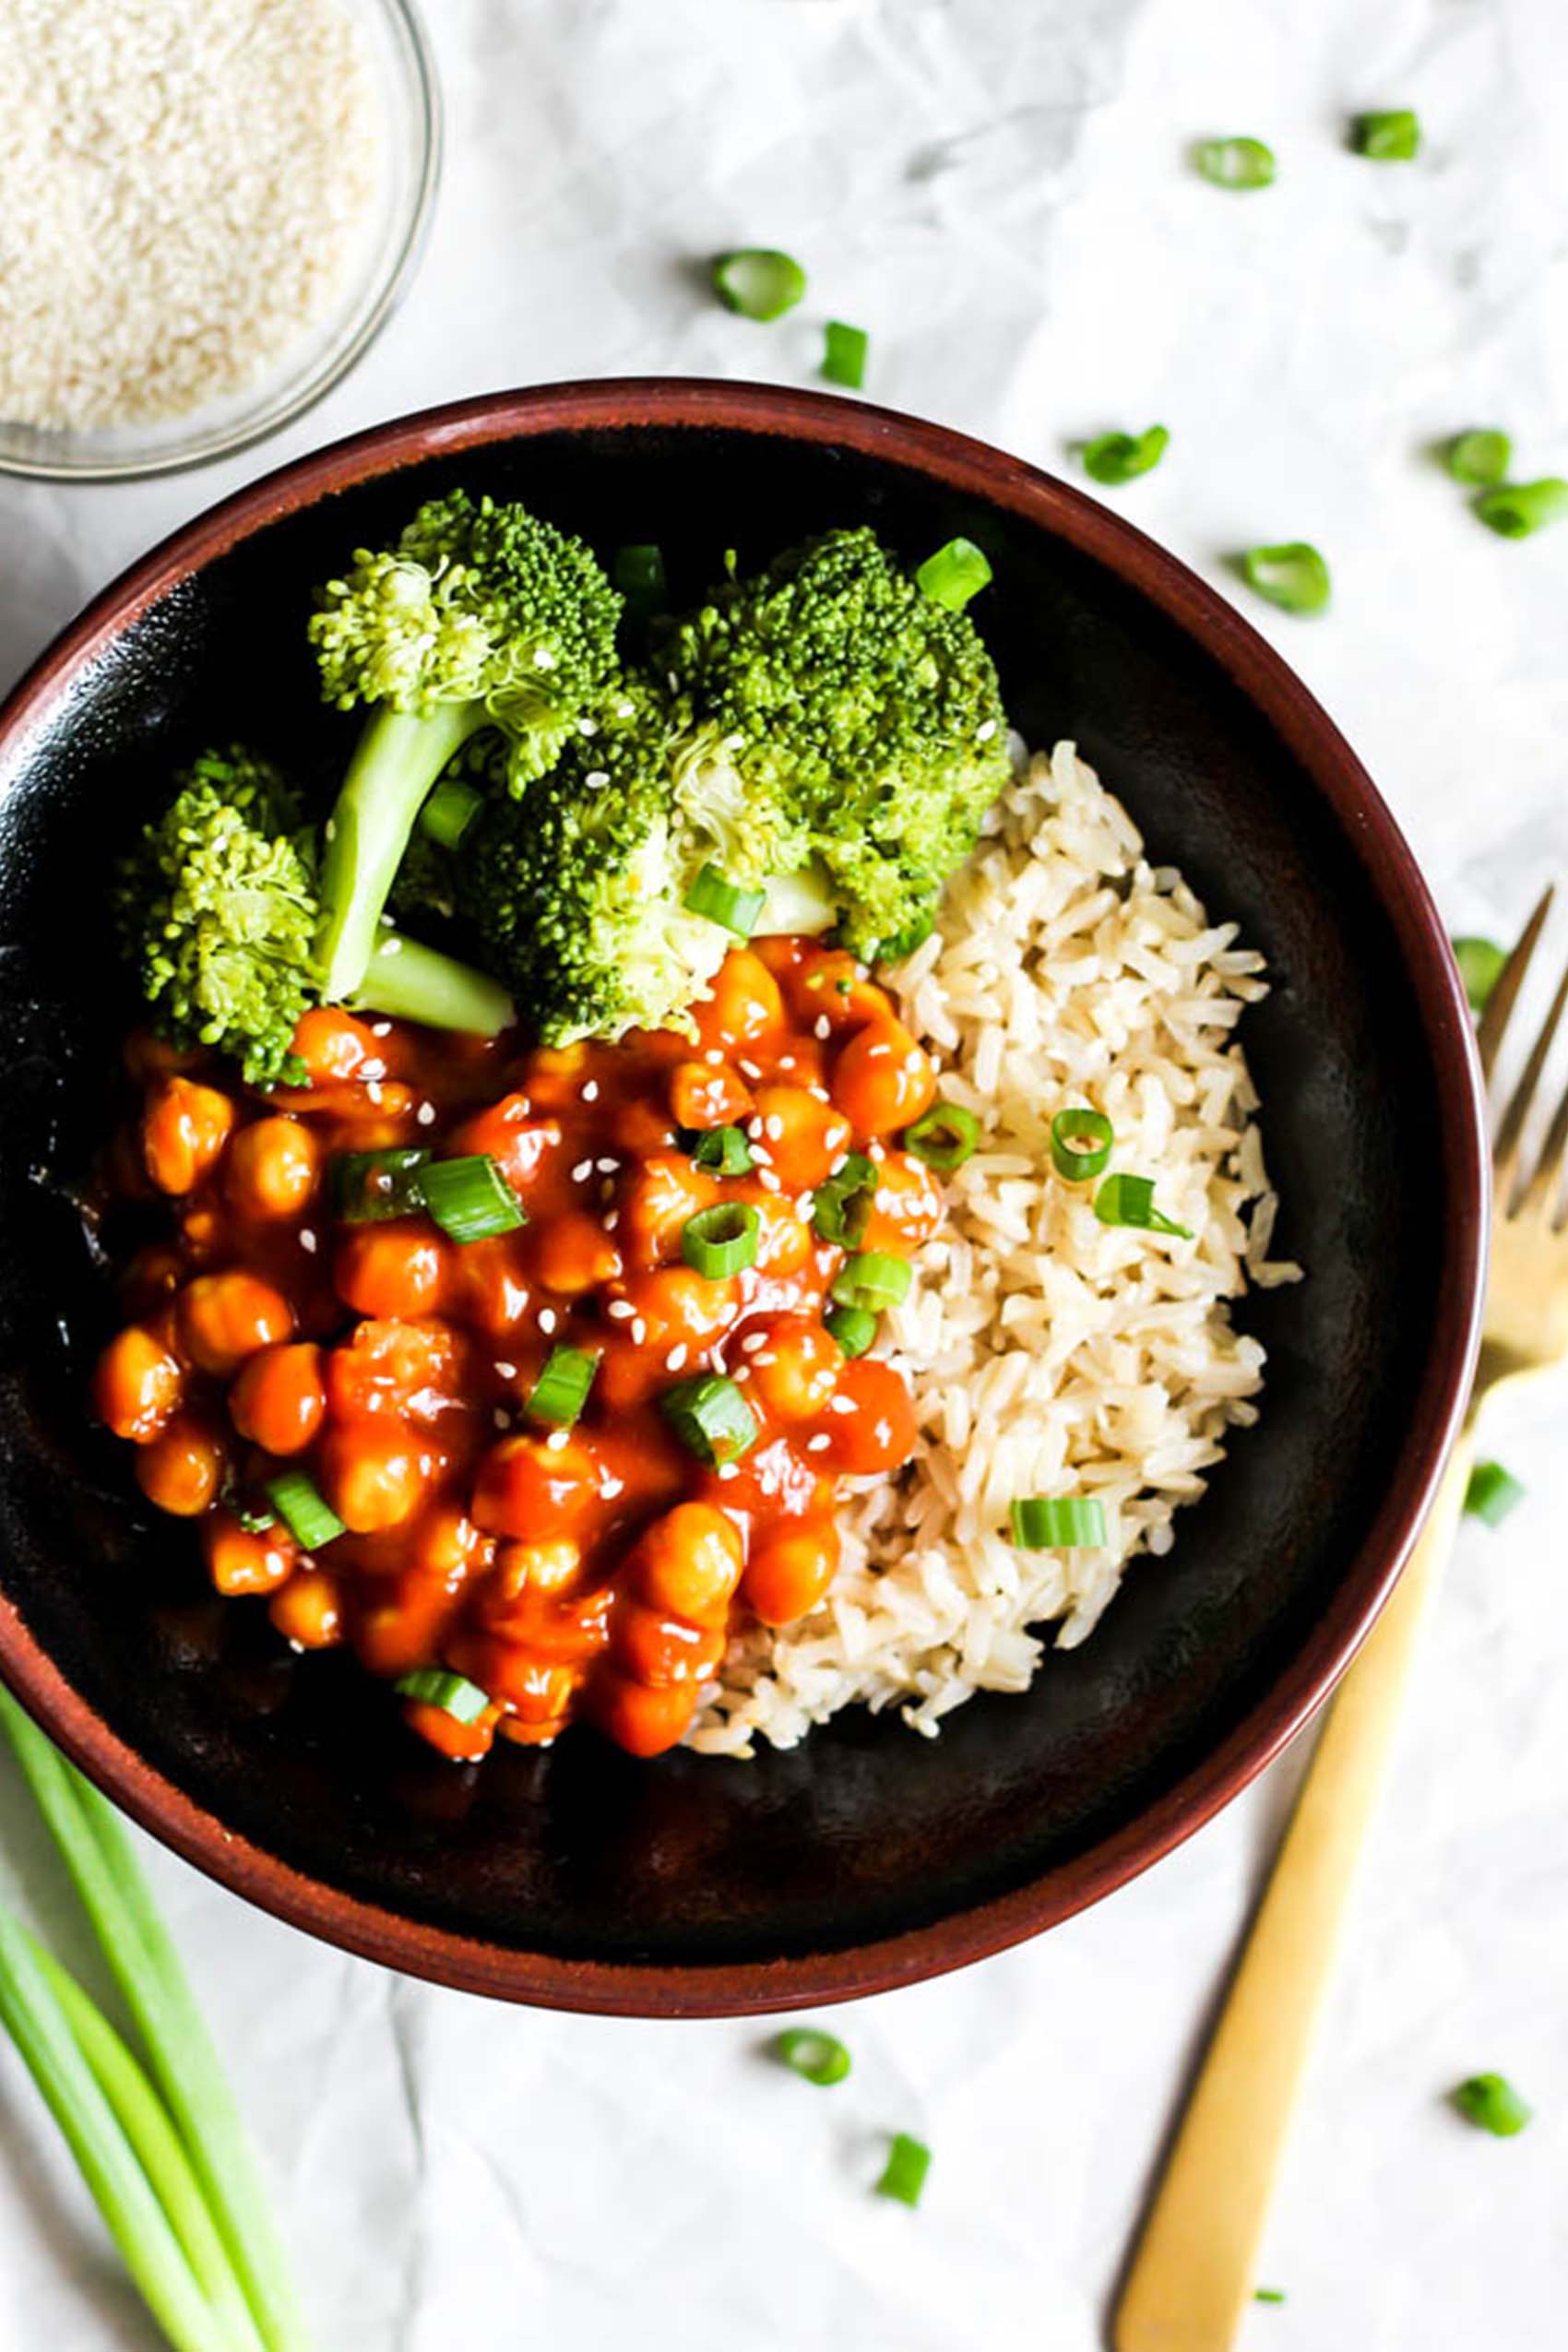 a bowl of brown rice topped with sweet and sour chickpeas and served with broccoli